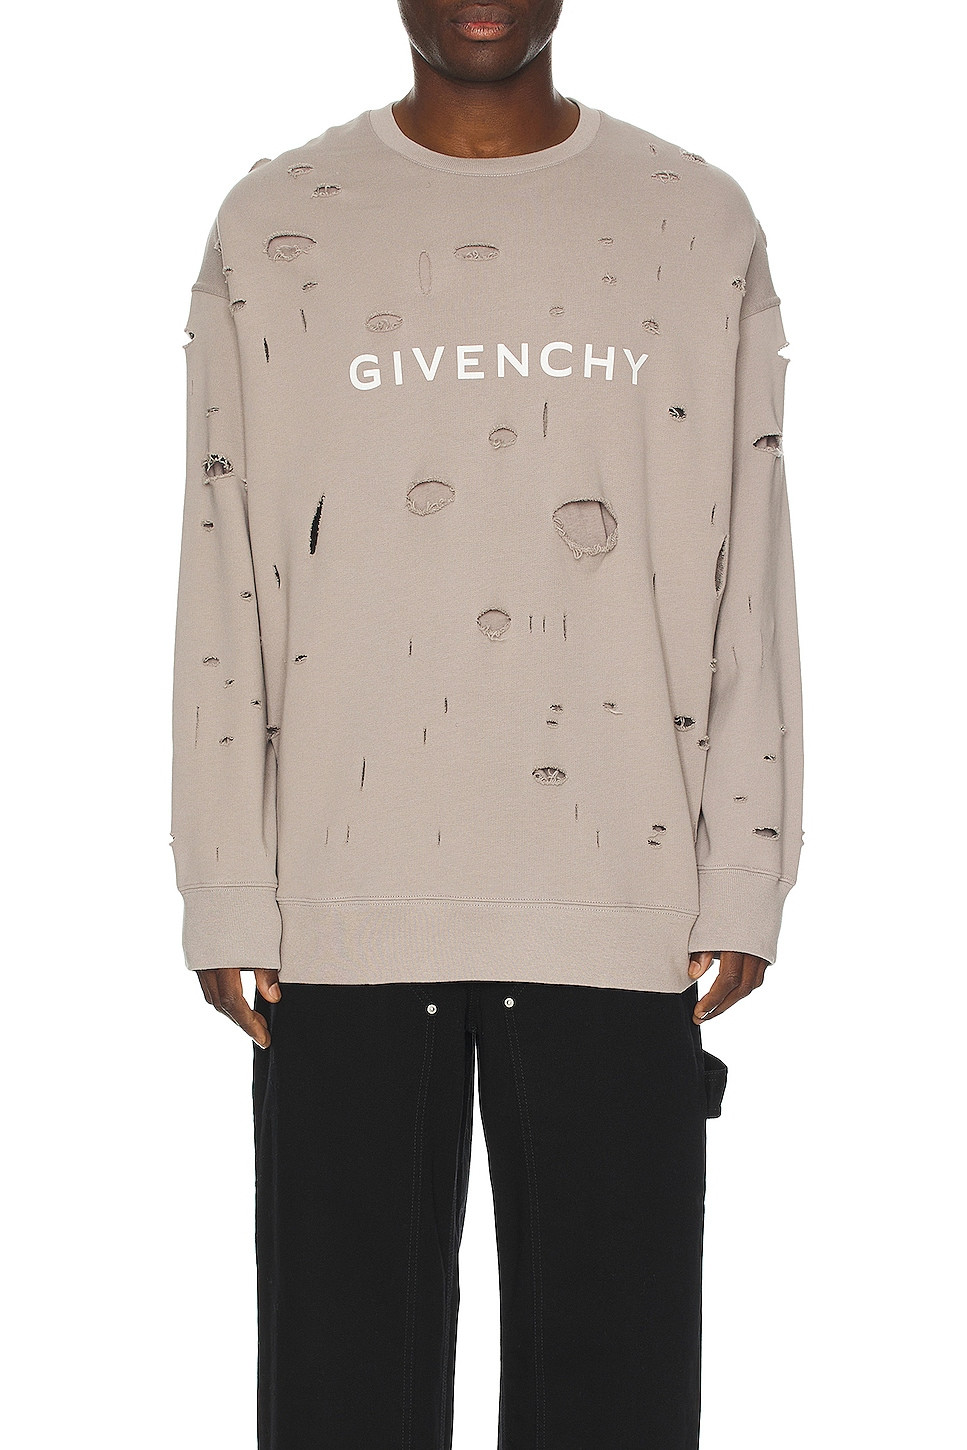 Givenchy Oversized Hole Sweater in Taupe